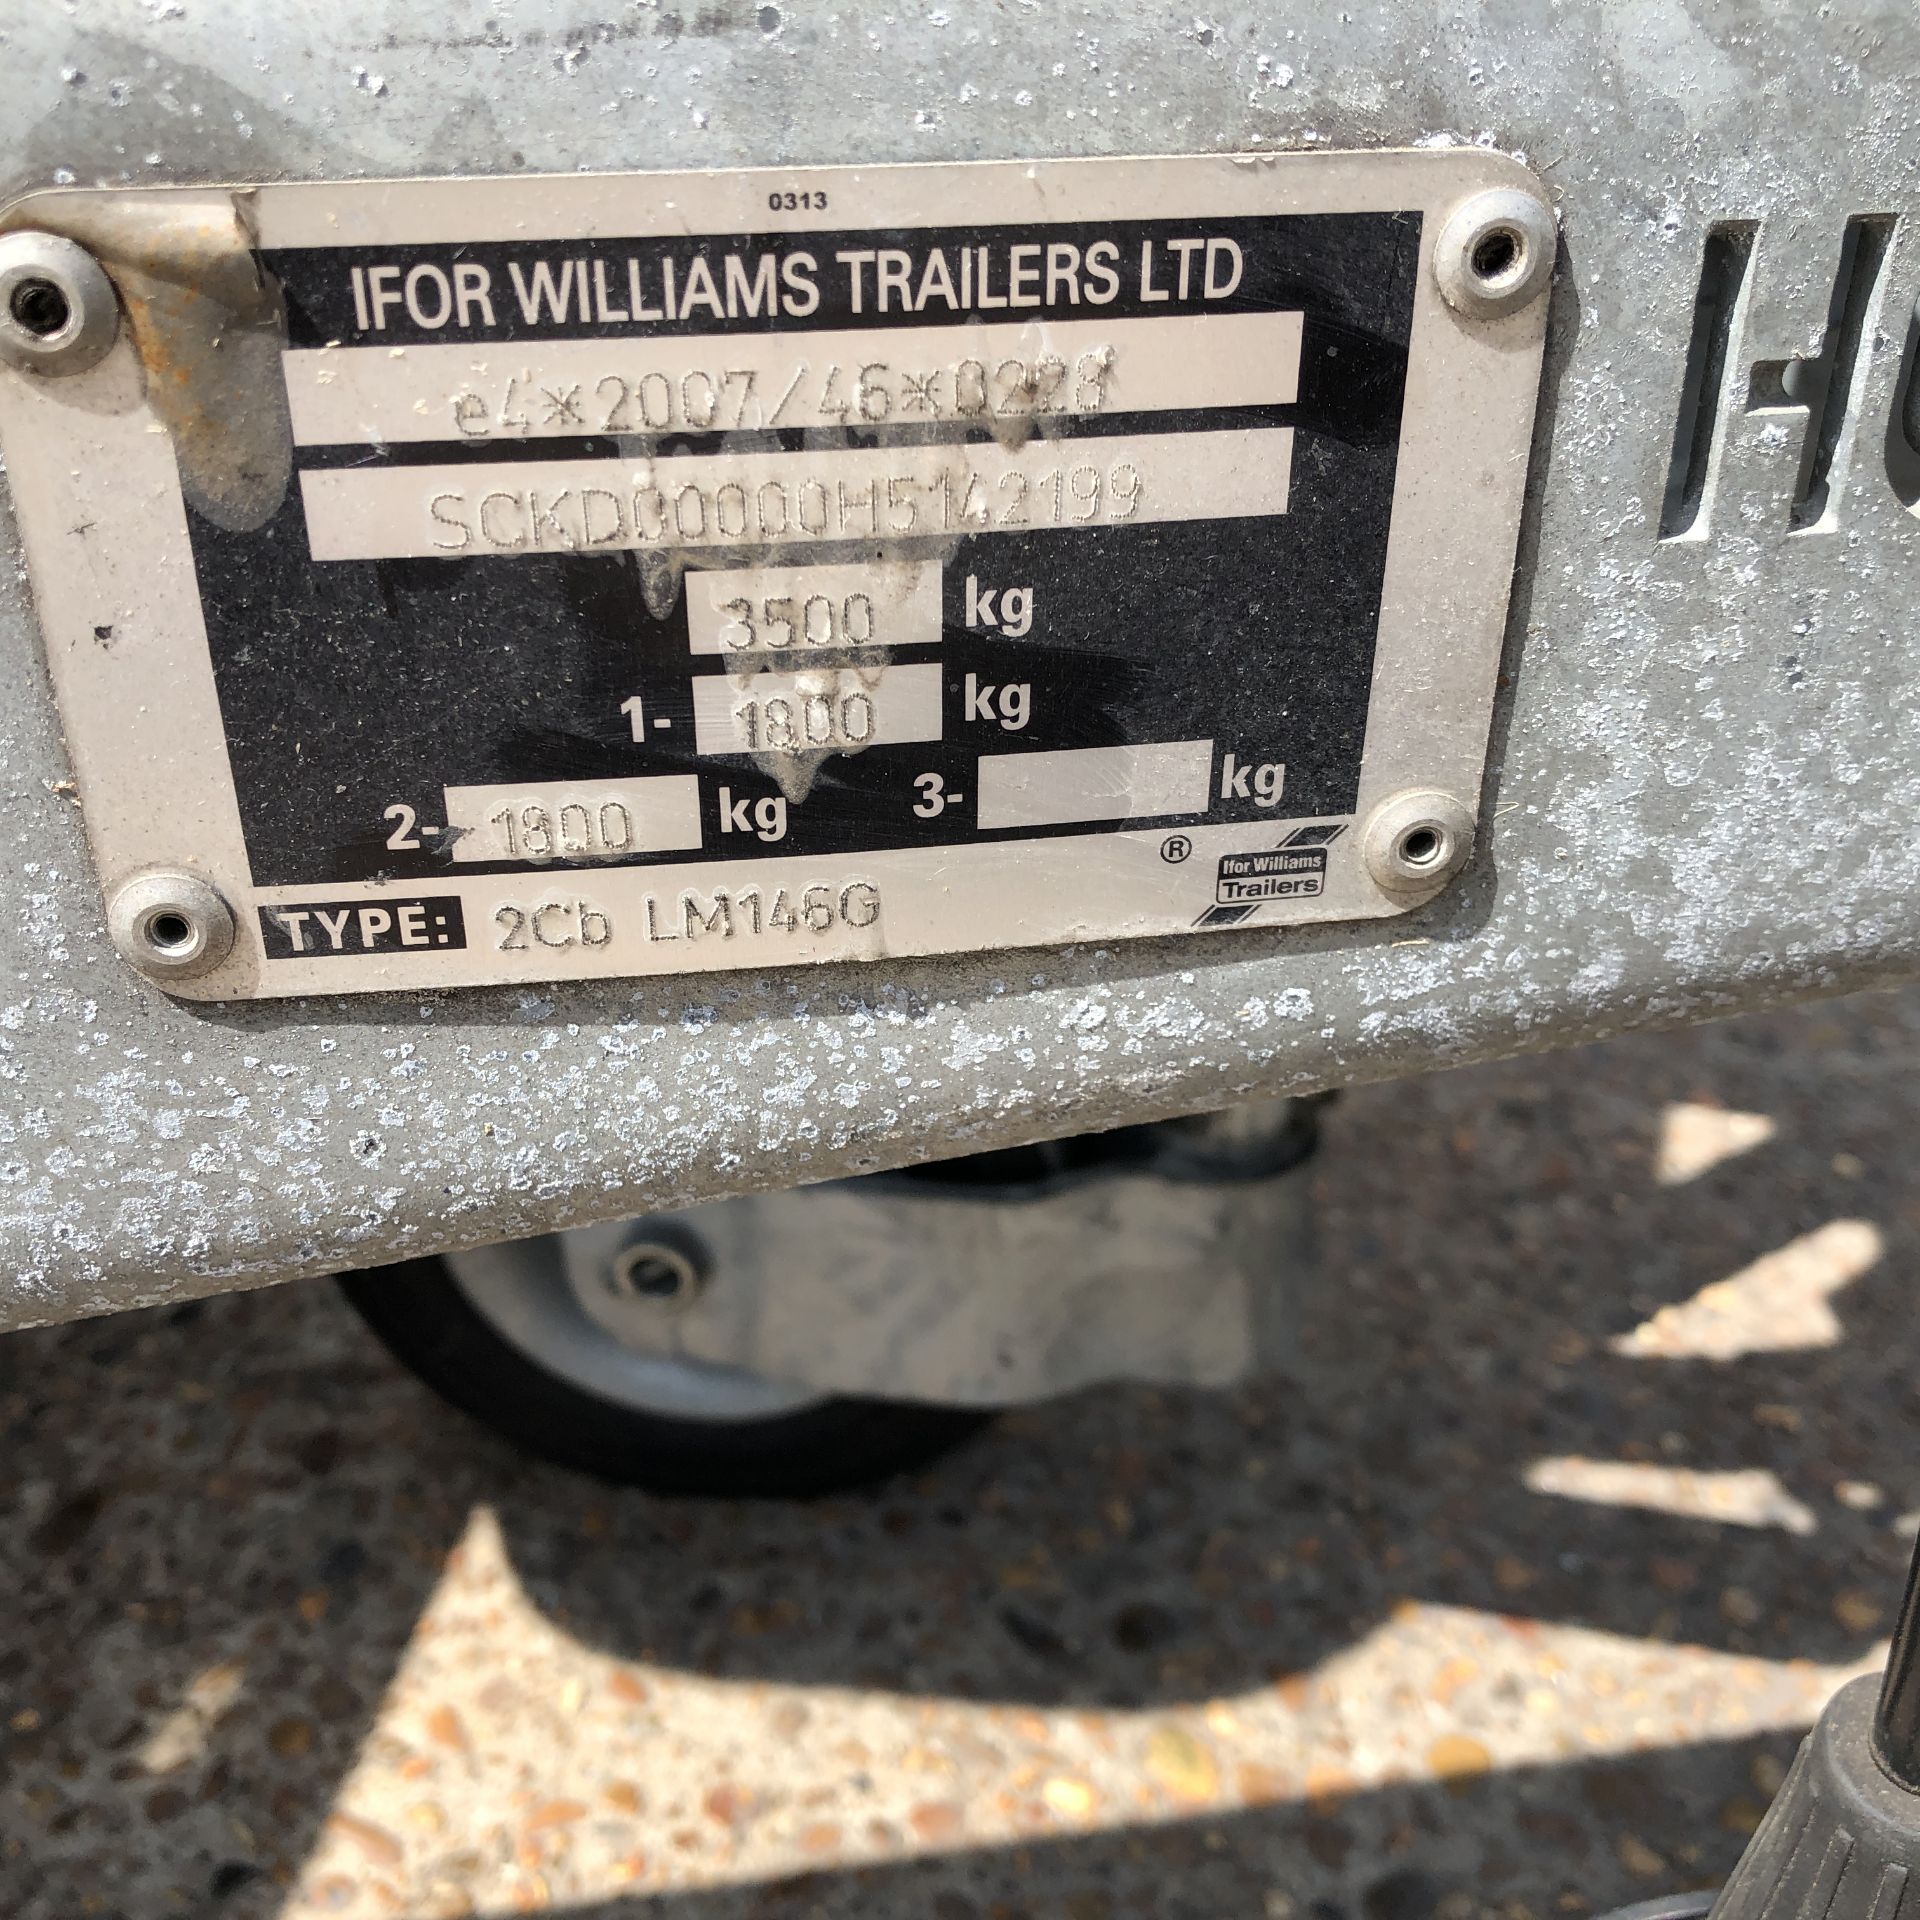 Ifor Williams Type 2CB LM146G Twin Axle Flat Trailer (2017), Serial Number 05142199, GVW 3500Kg; 14’ - Image 7 of 9